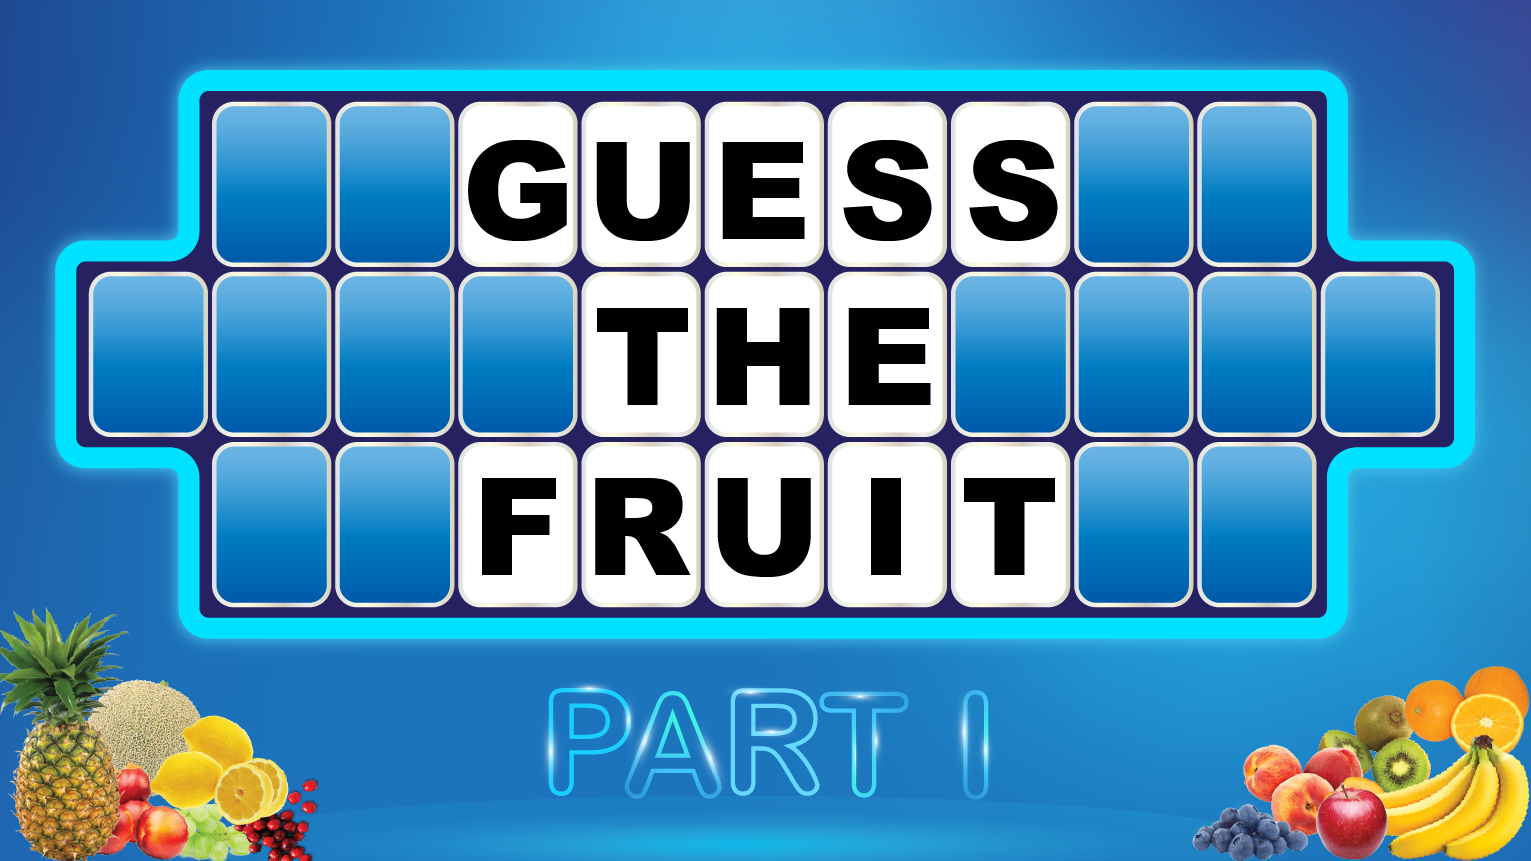 Word Guessing Game - Guess the Fruit - Part 1